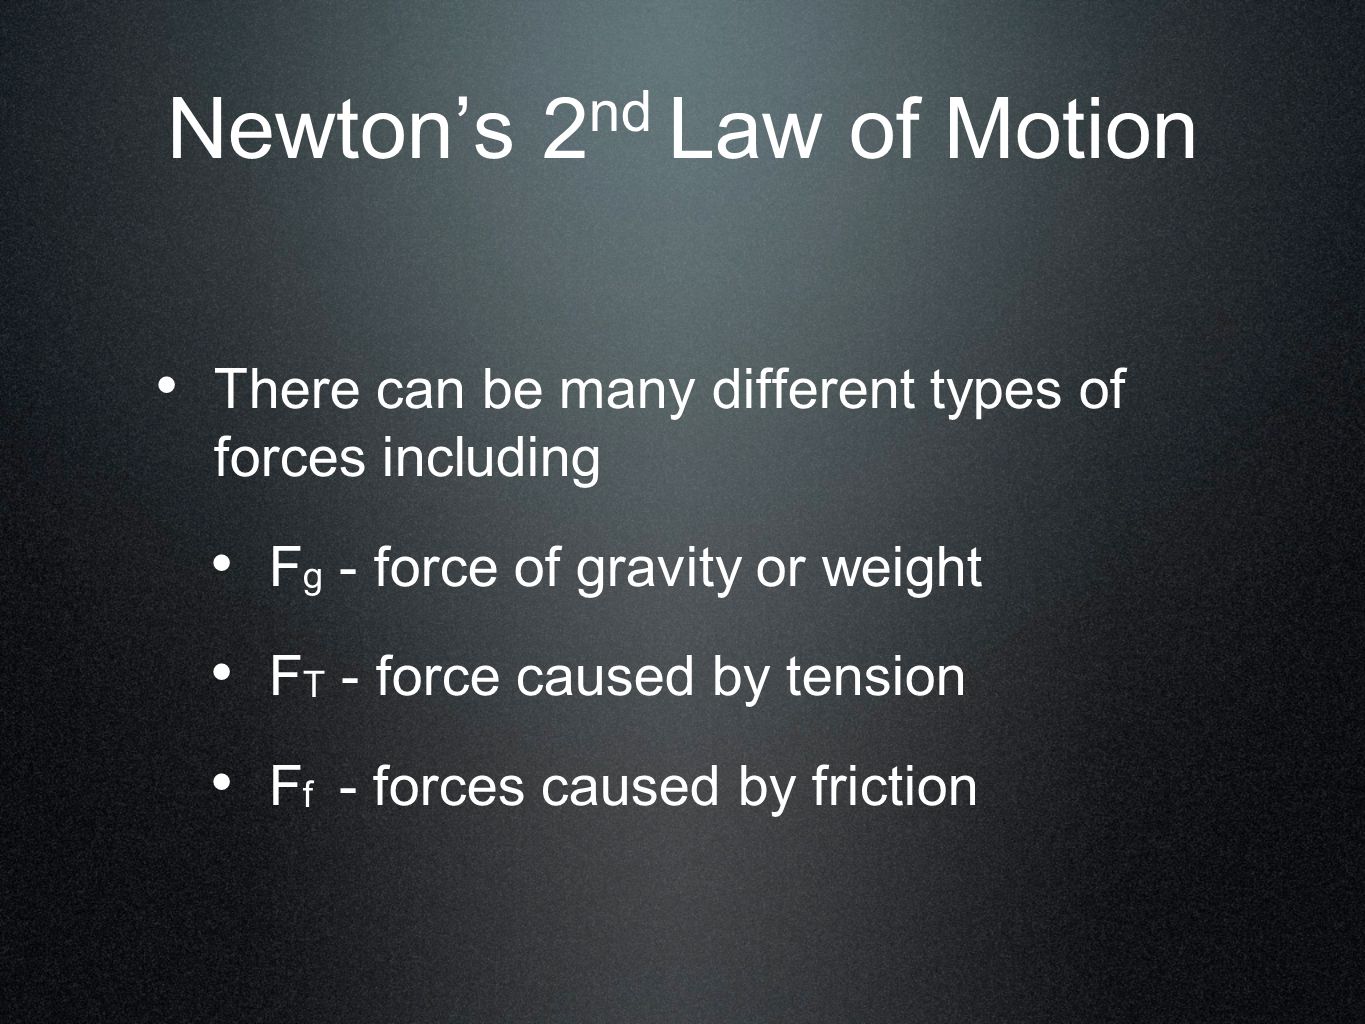 Newton’s 2 nd Law of Motion There can be many different types of forces including F g - force of gravity or weight F T - force caused by tension F f - forces caused by friction